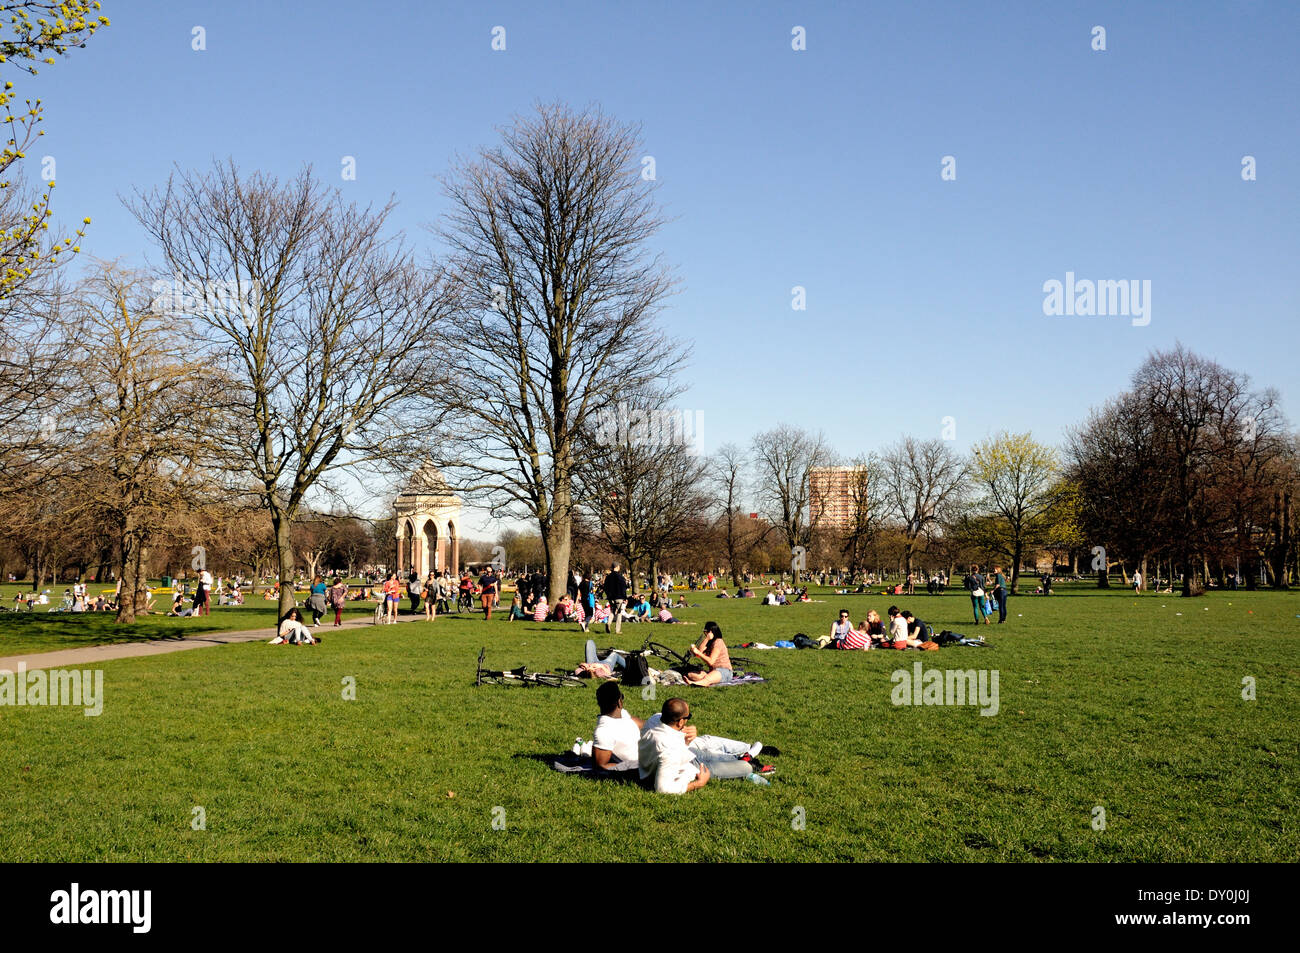 People sitting on the grass in Victoria Park, London Borough of Tower Hamlets, England Britain UK Stock Photo